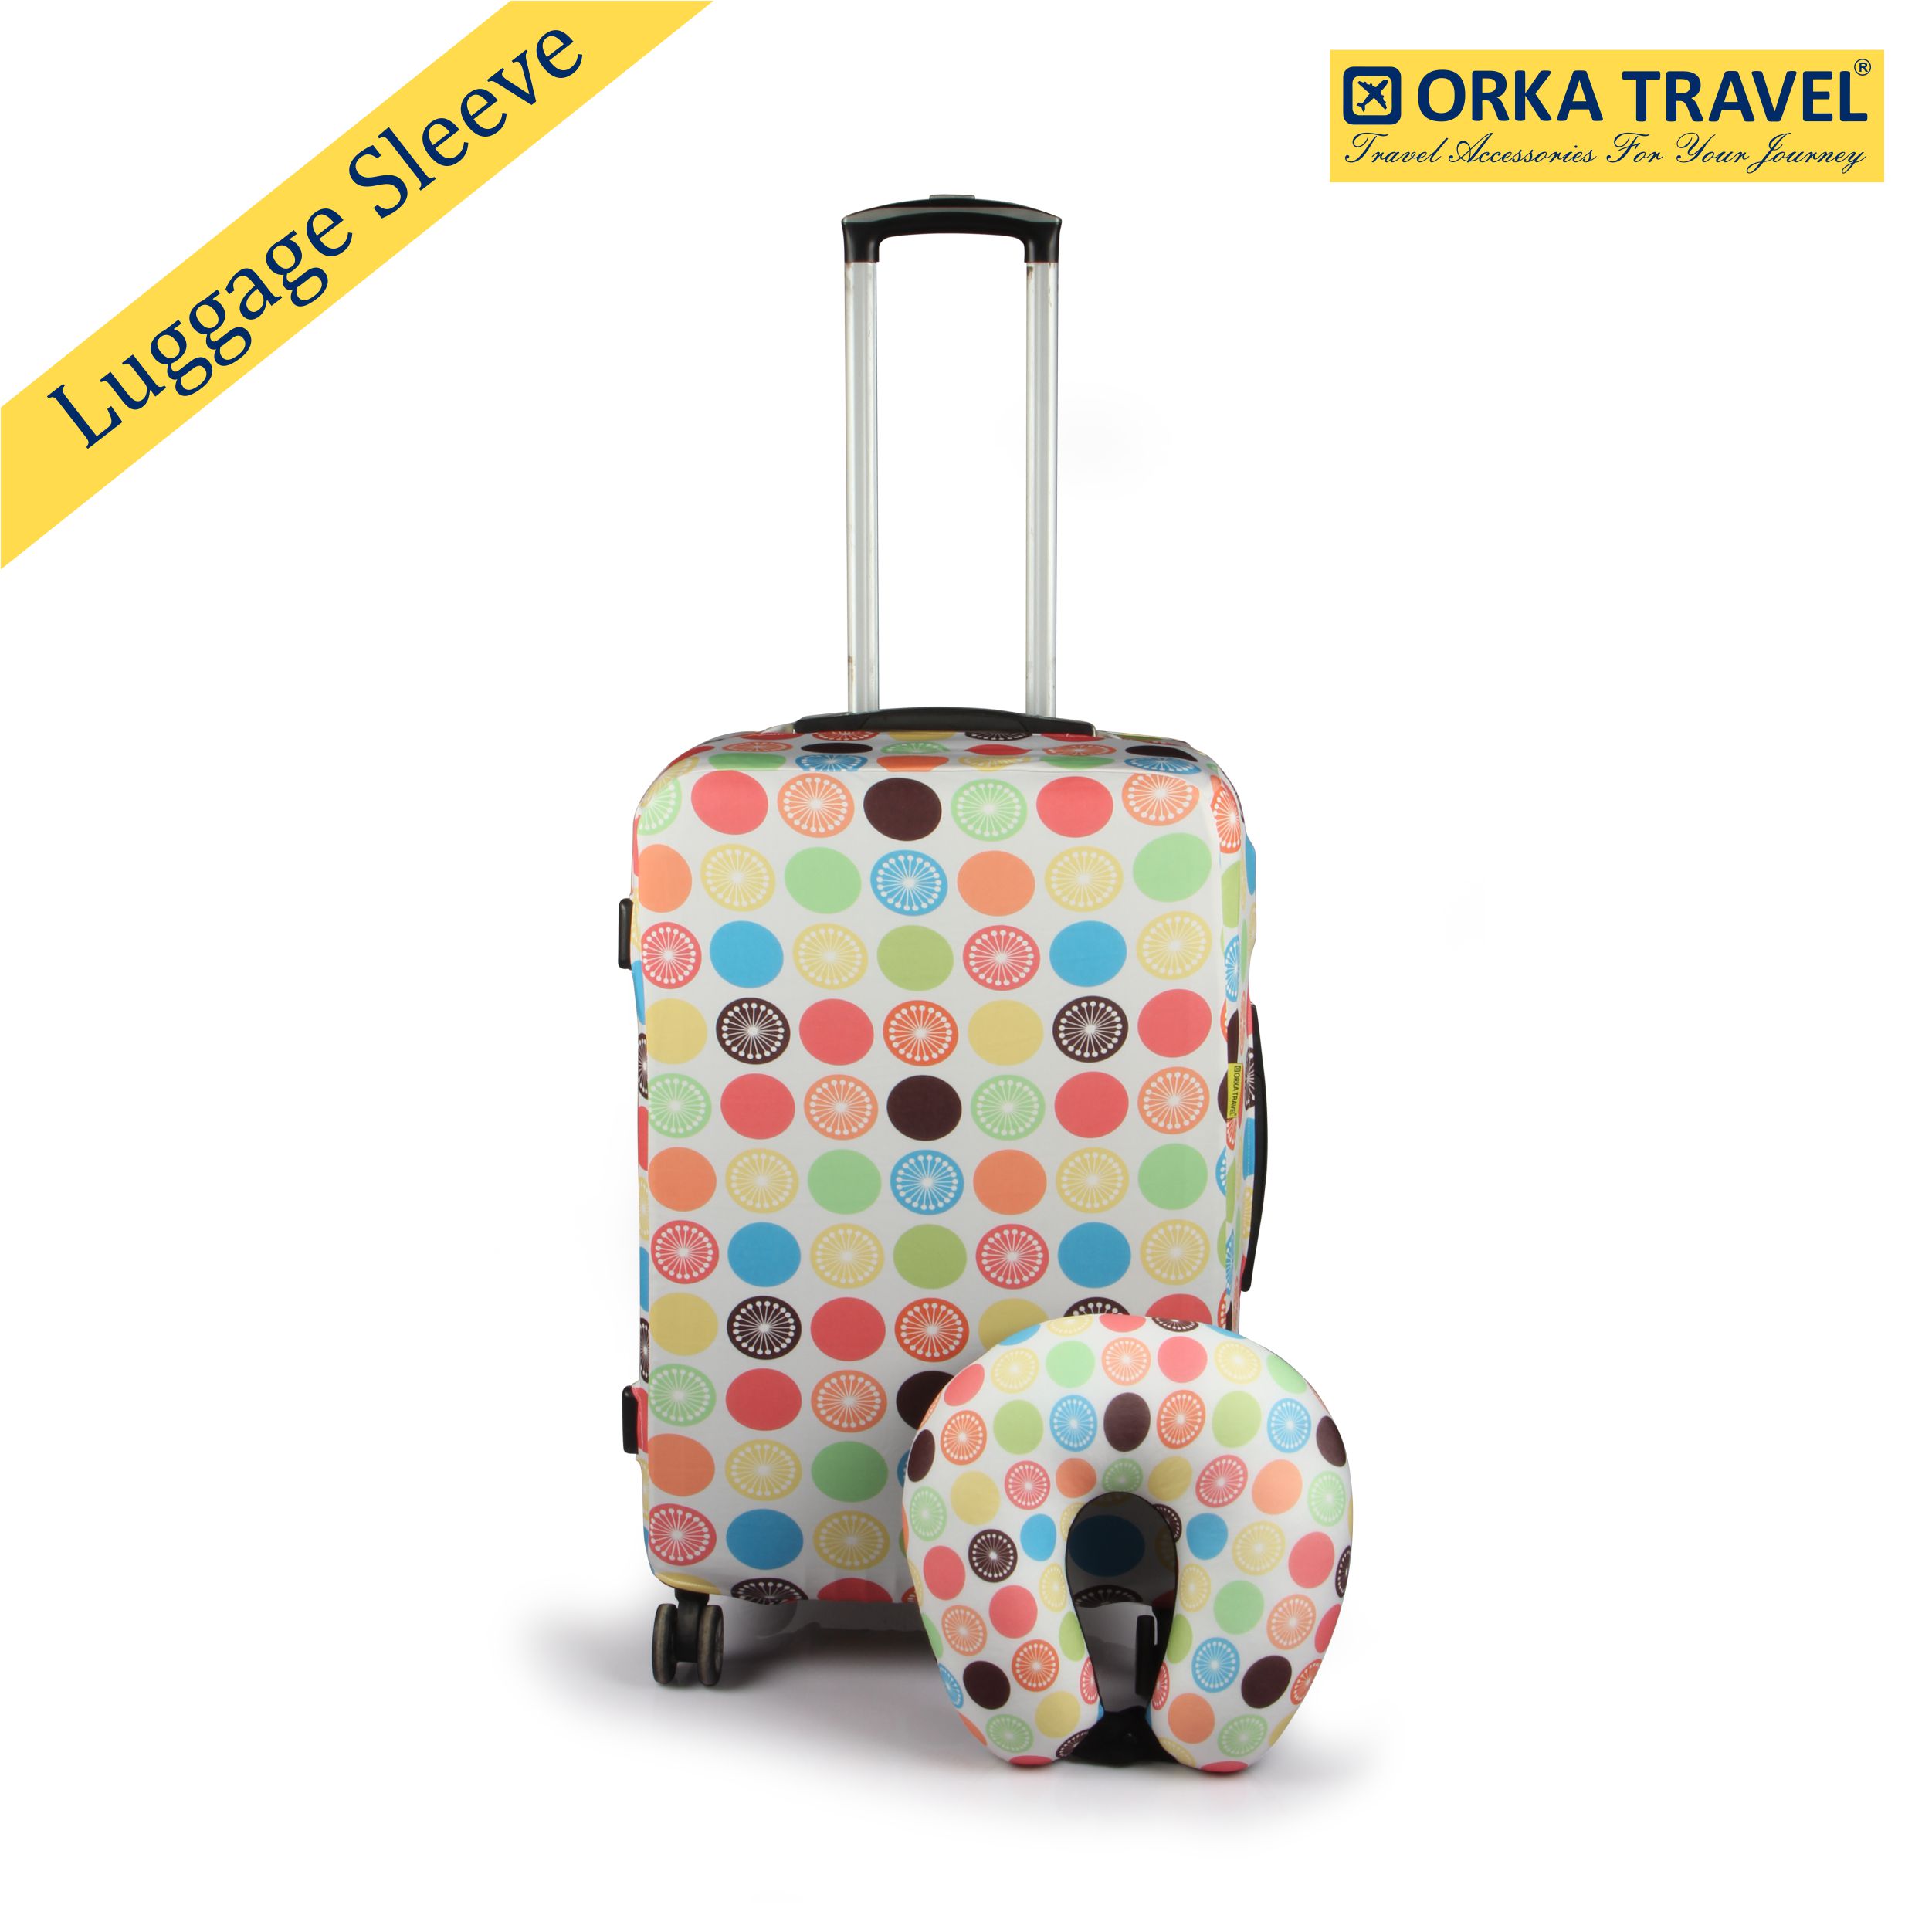 ORKA TRAVEL Lemon Theme LUGGAGE PROTECTOR WITH MATCHING U NECK PILLOW LUGGAGE COVER  